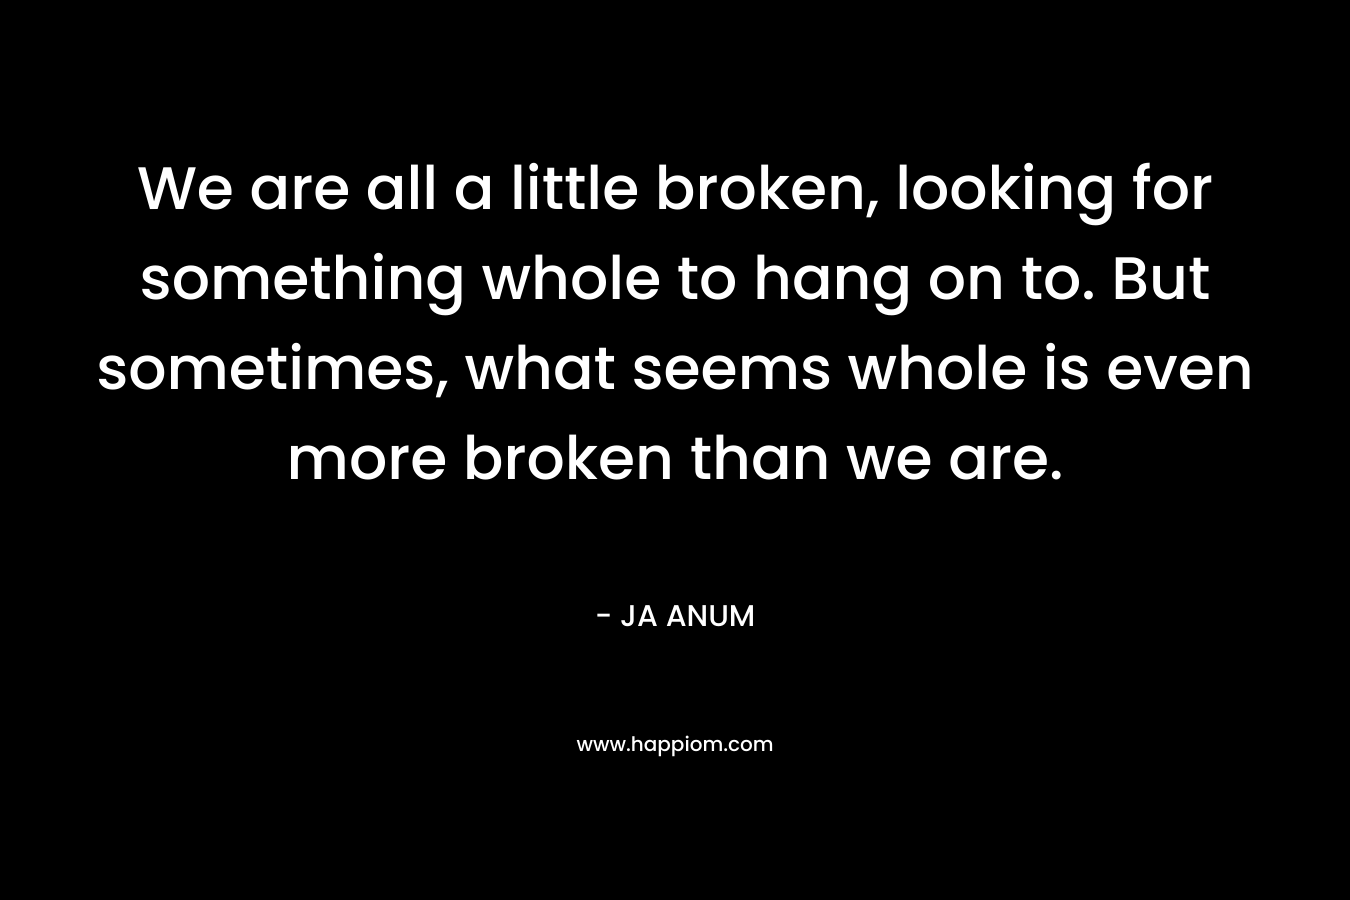 We are all a little broken, looking for something whole to hang on to. But sometimes, what seems whole is even more broken than we are.